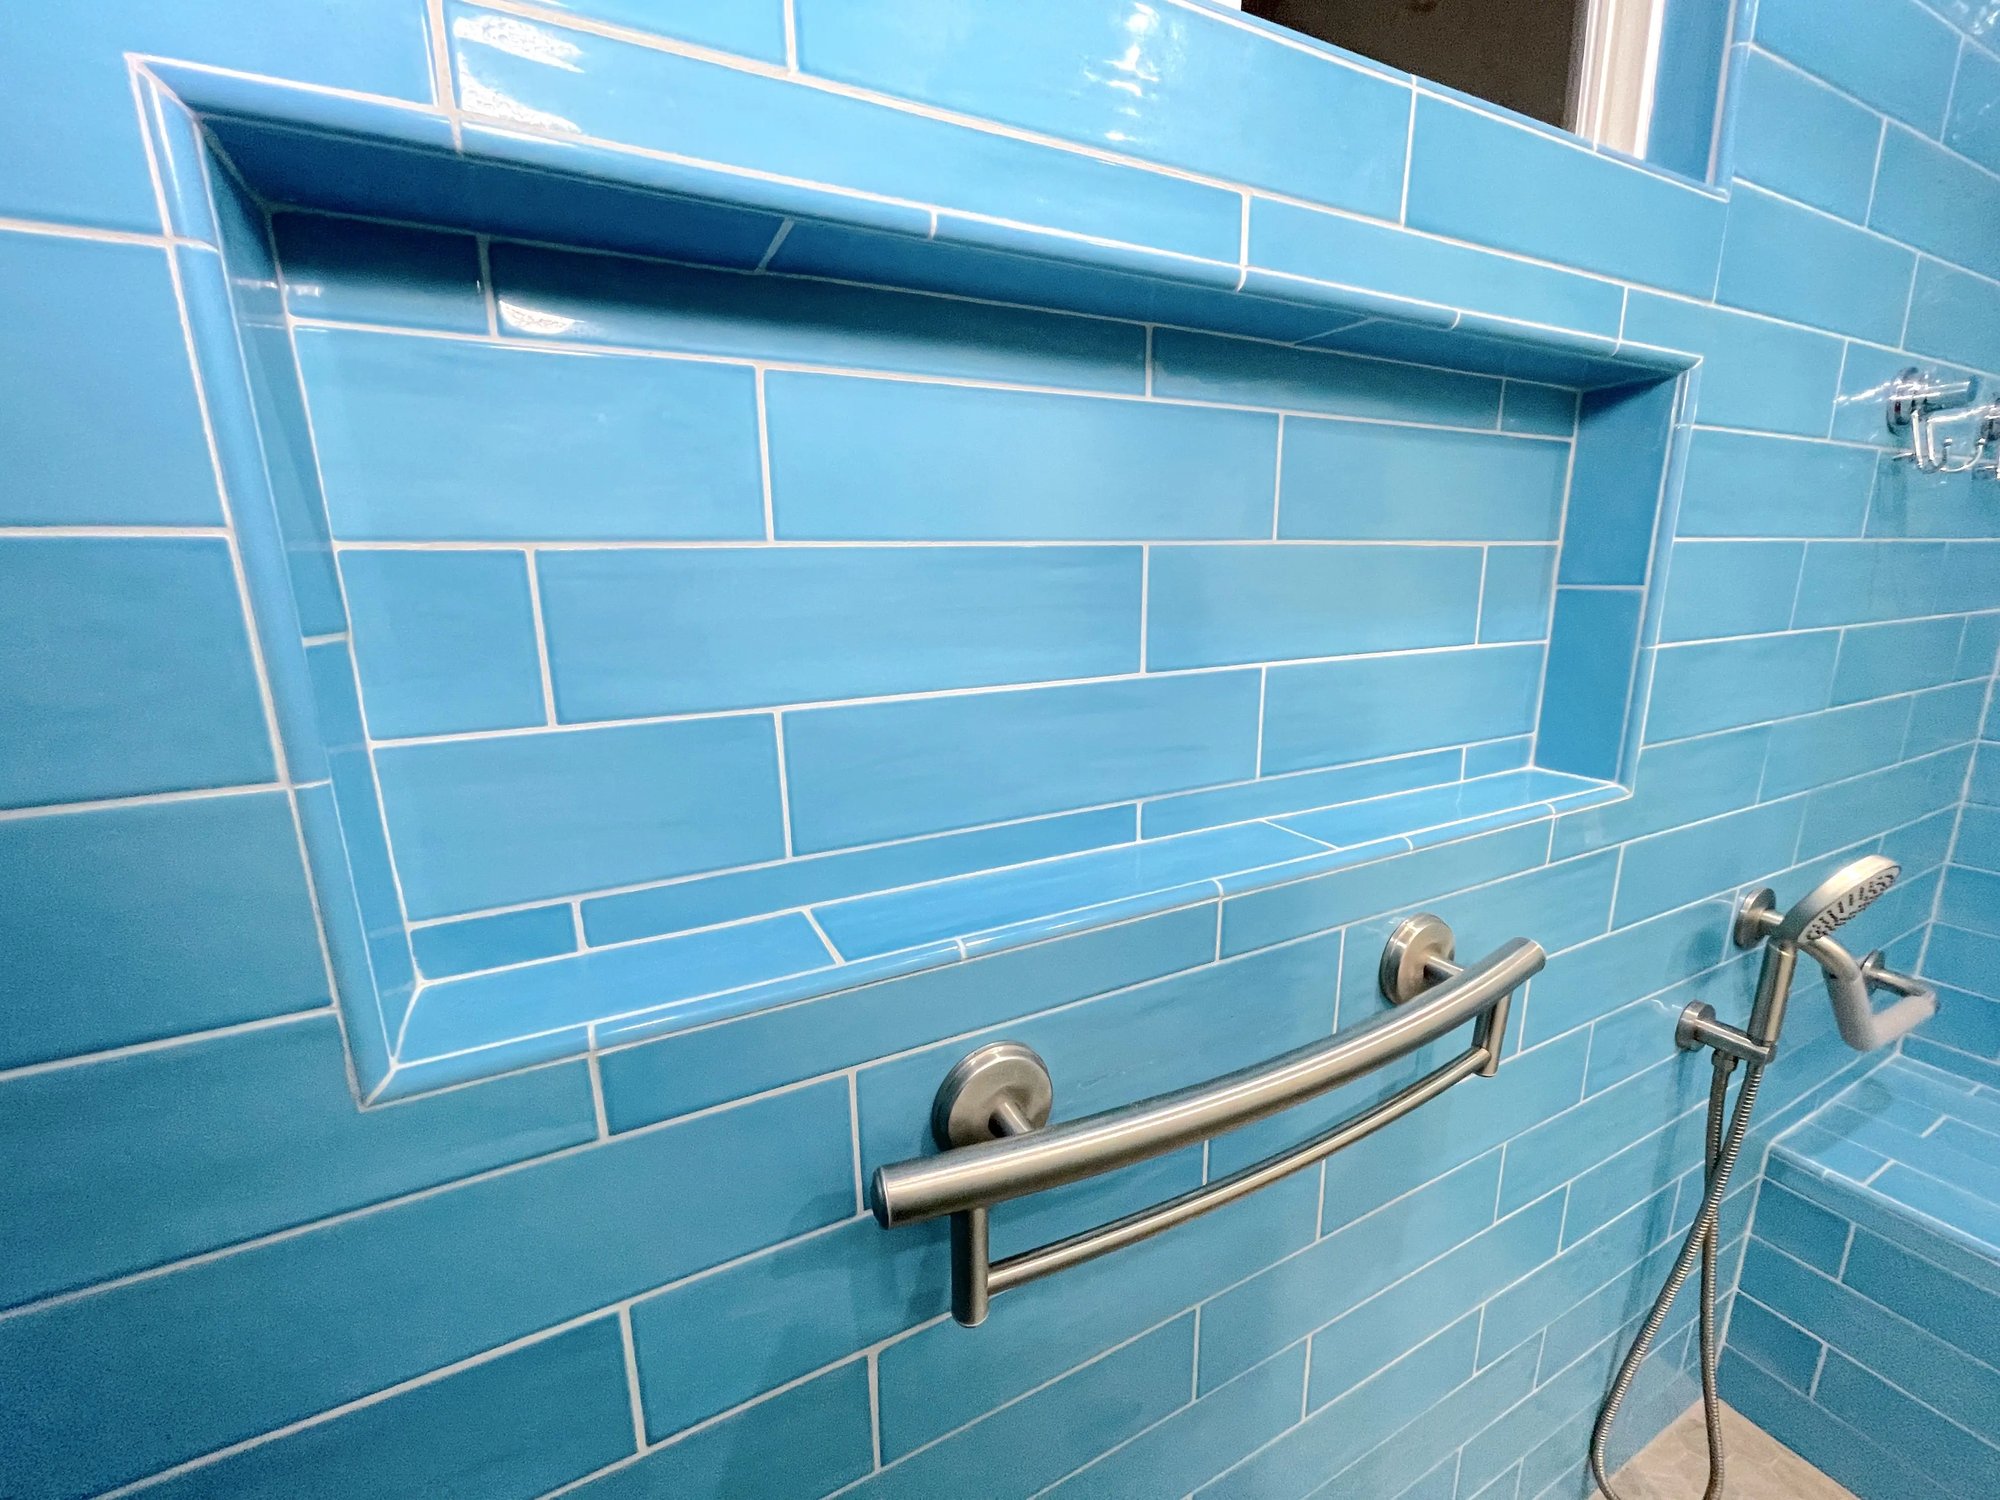 An extra large niche was created for this shower.